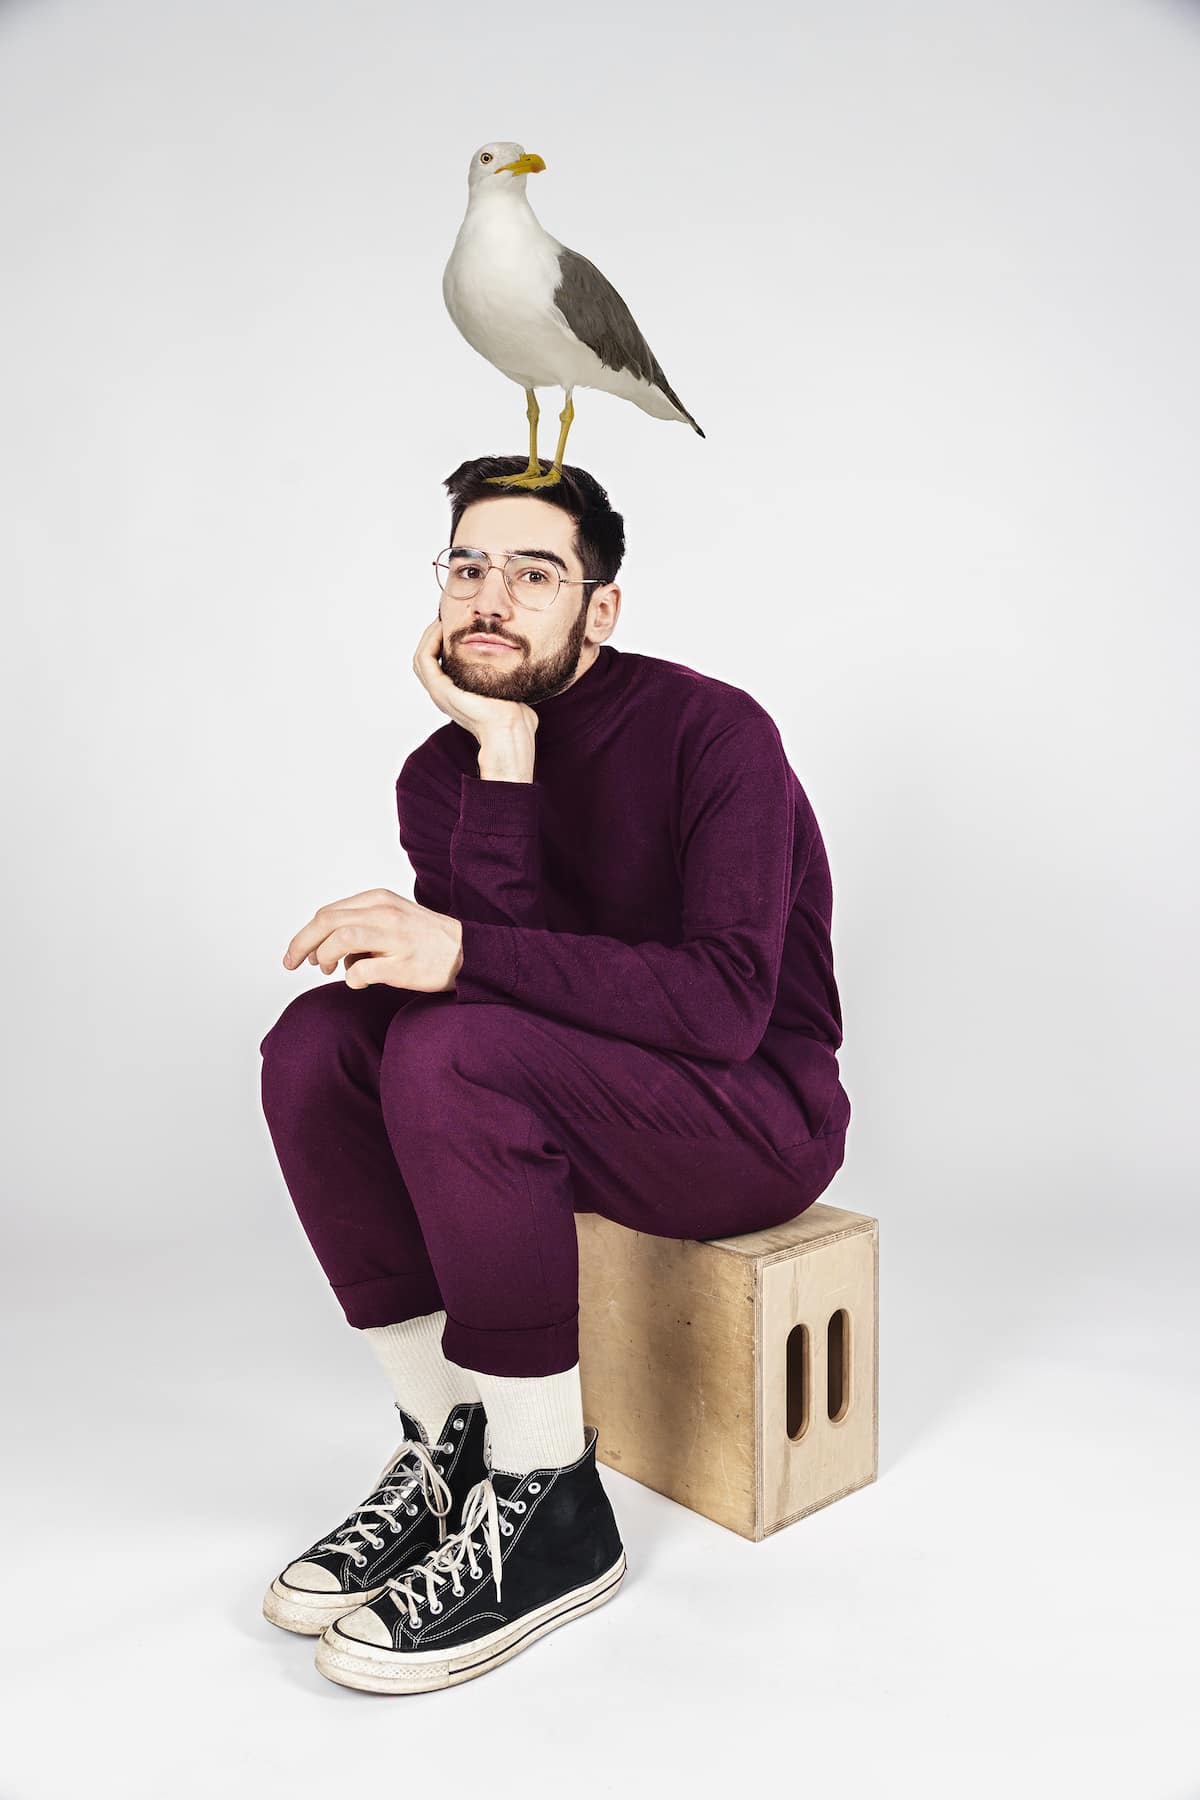 Sam Morrison sitting on a box with a bird perched on his head.